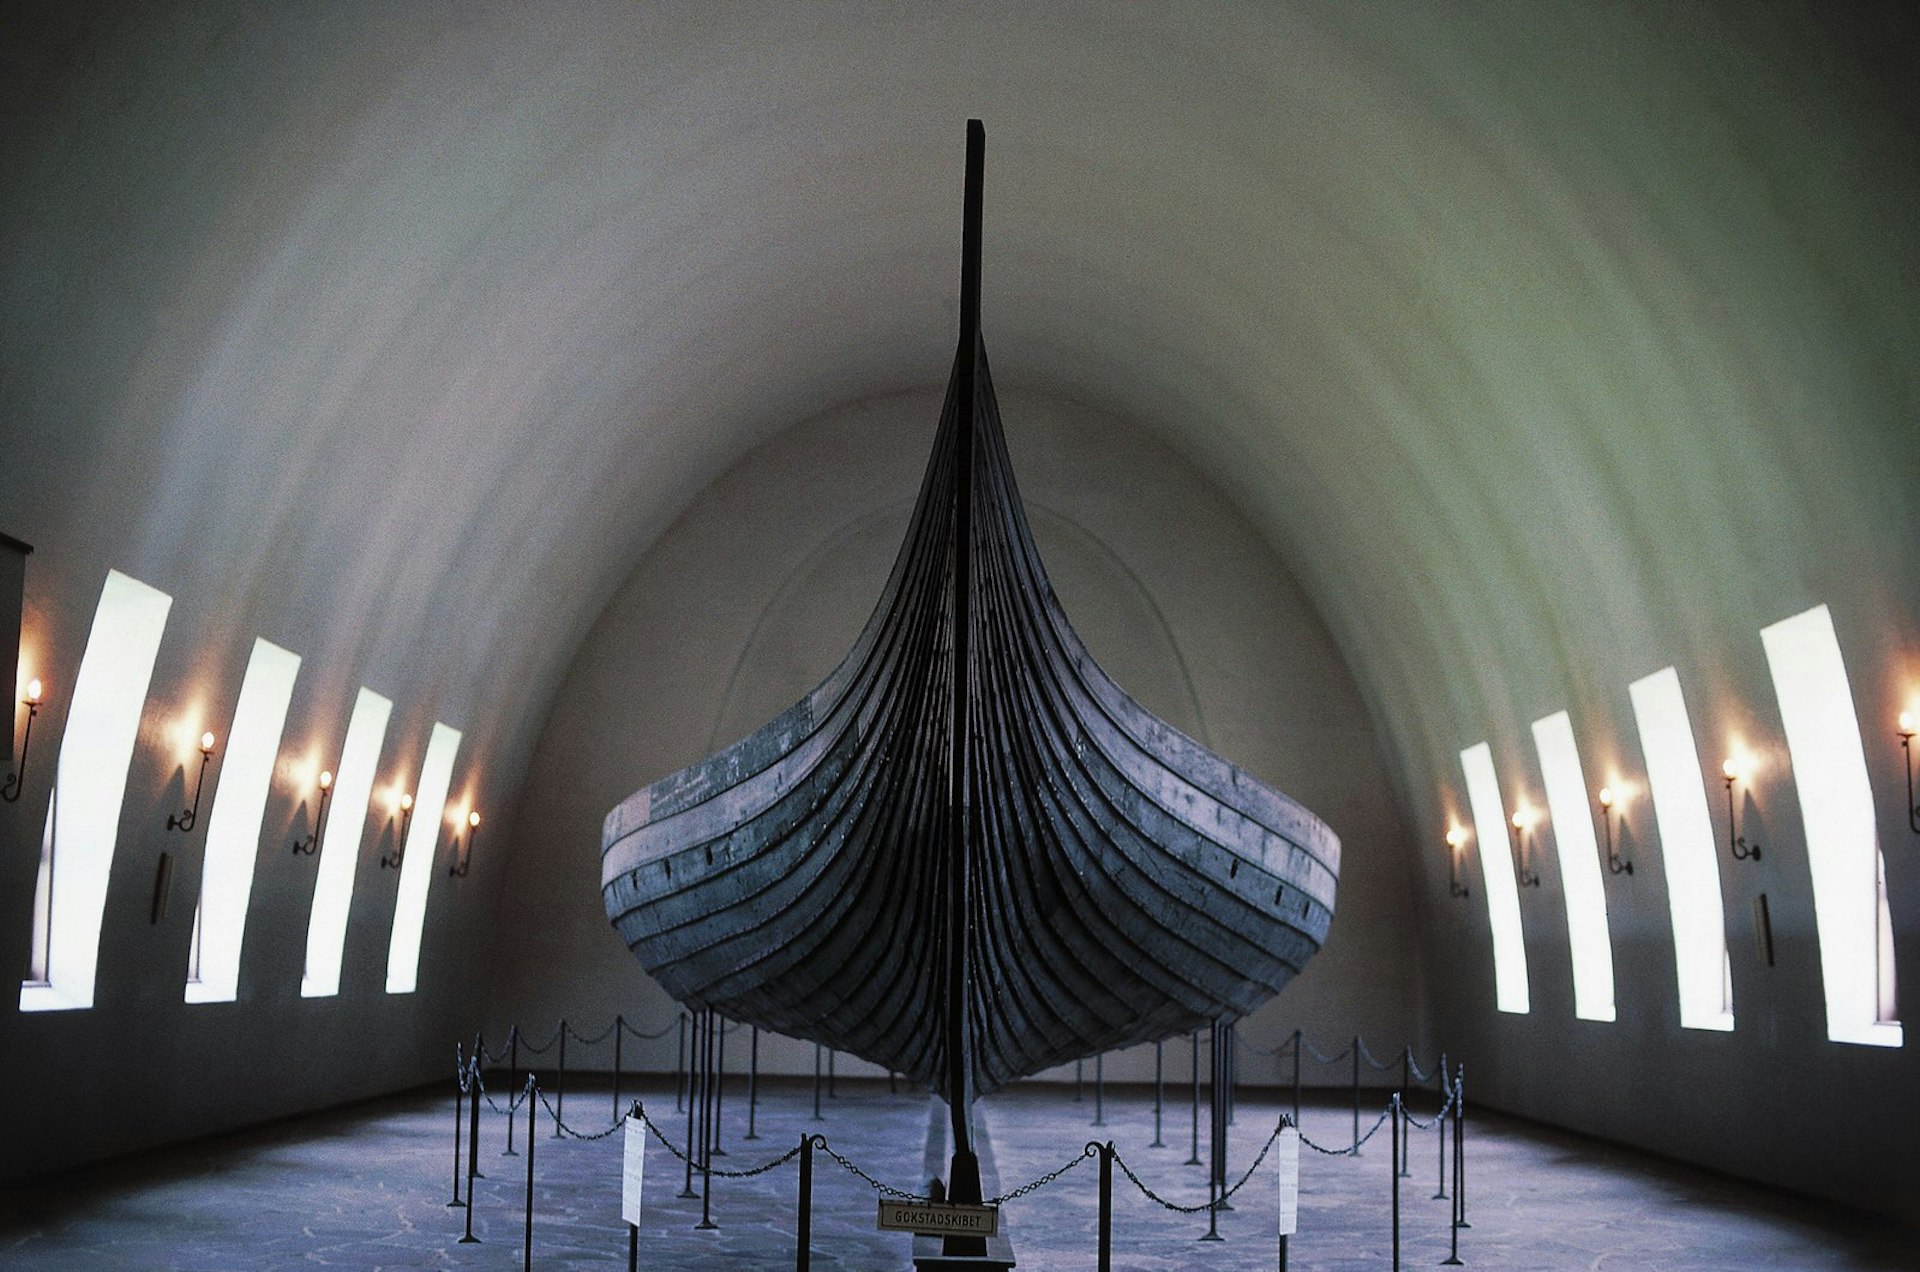 A Viking longship inside the Viking Ship Museum, Oslo, Norway © DeAgostini / Getty Images